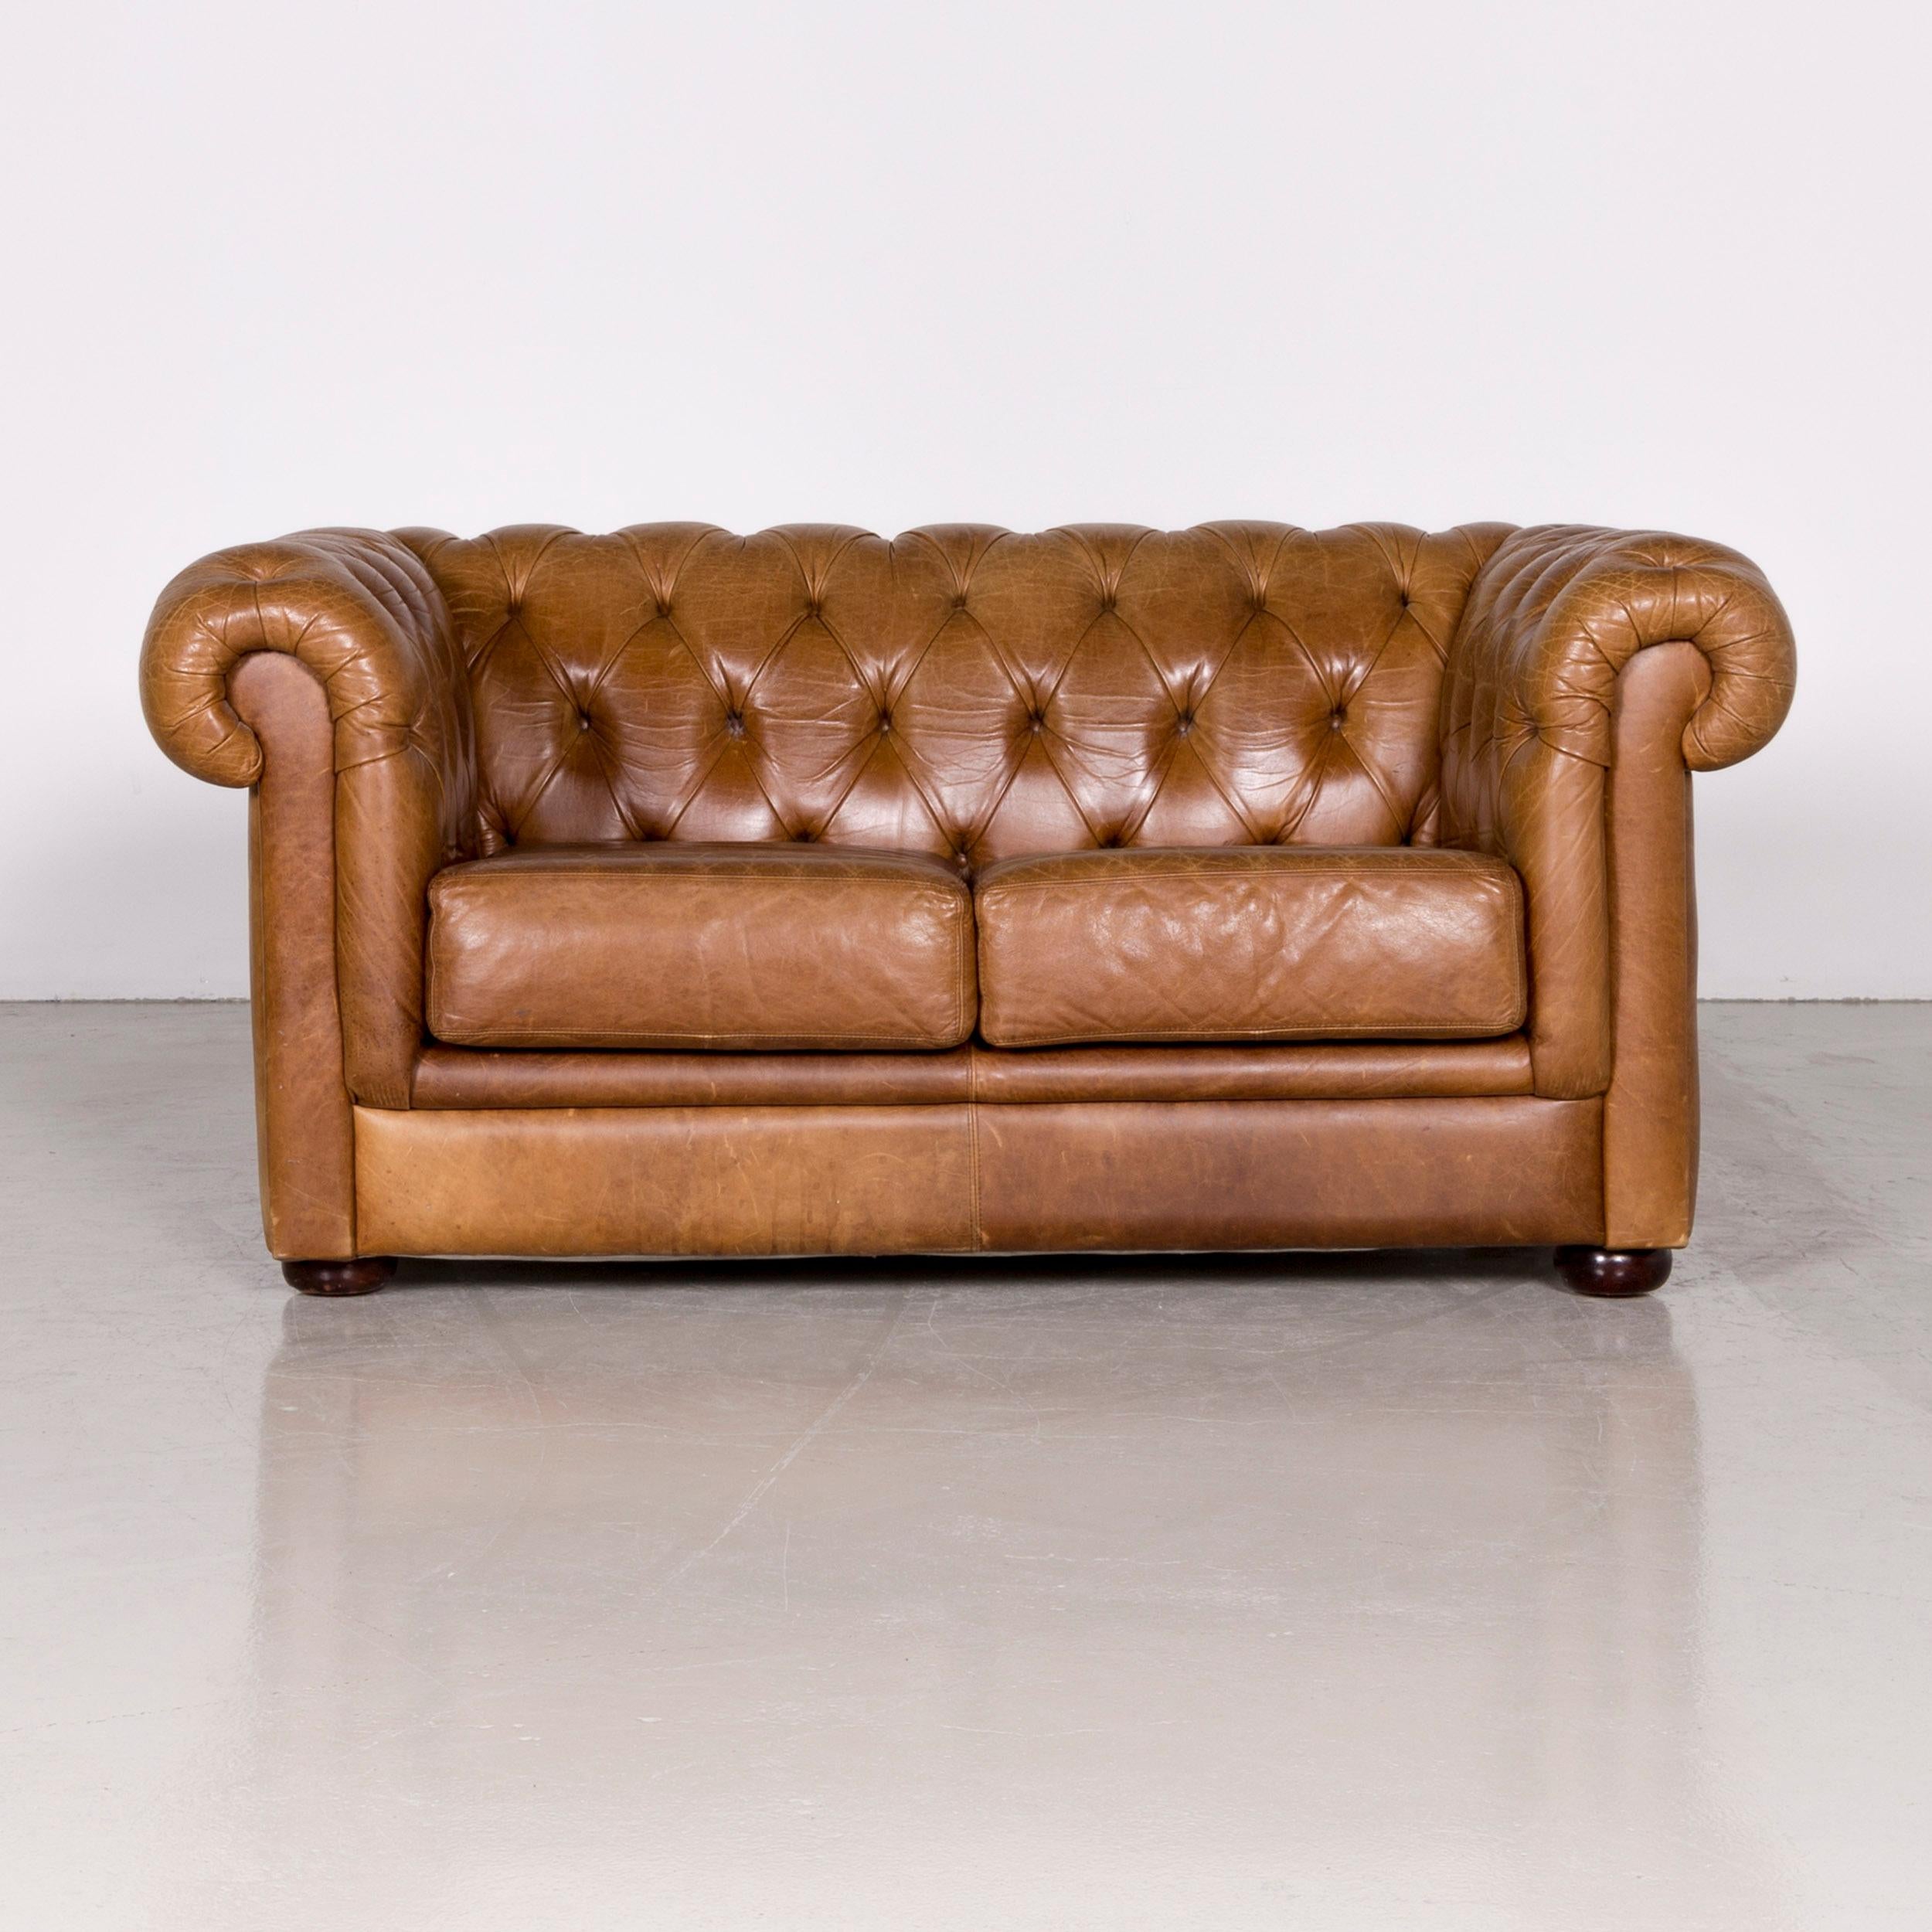 Chesterfield leather sofa armchair set brown red vintage two-seat couch.